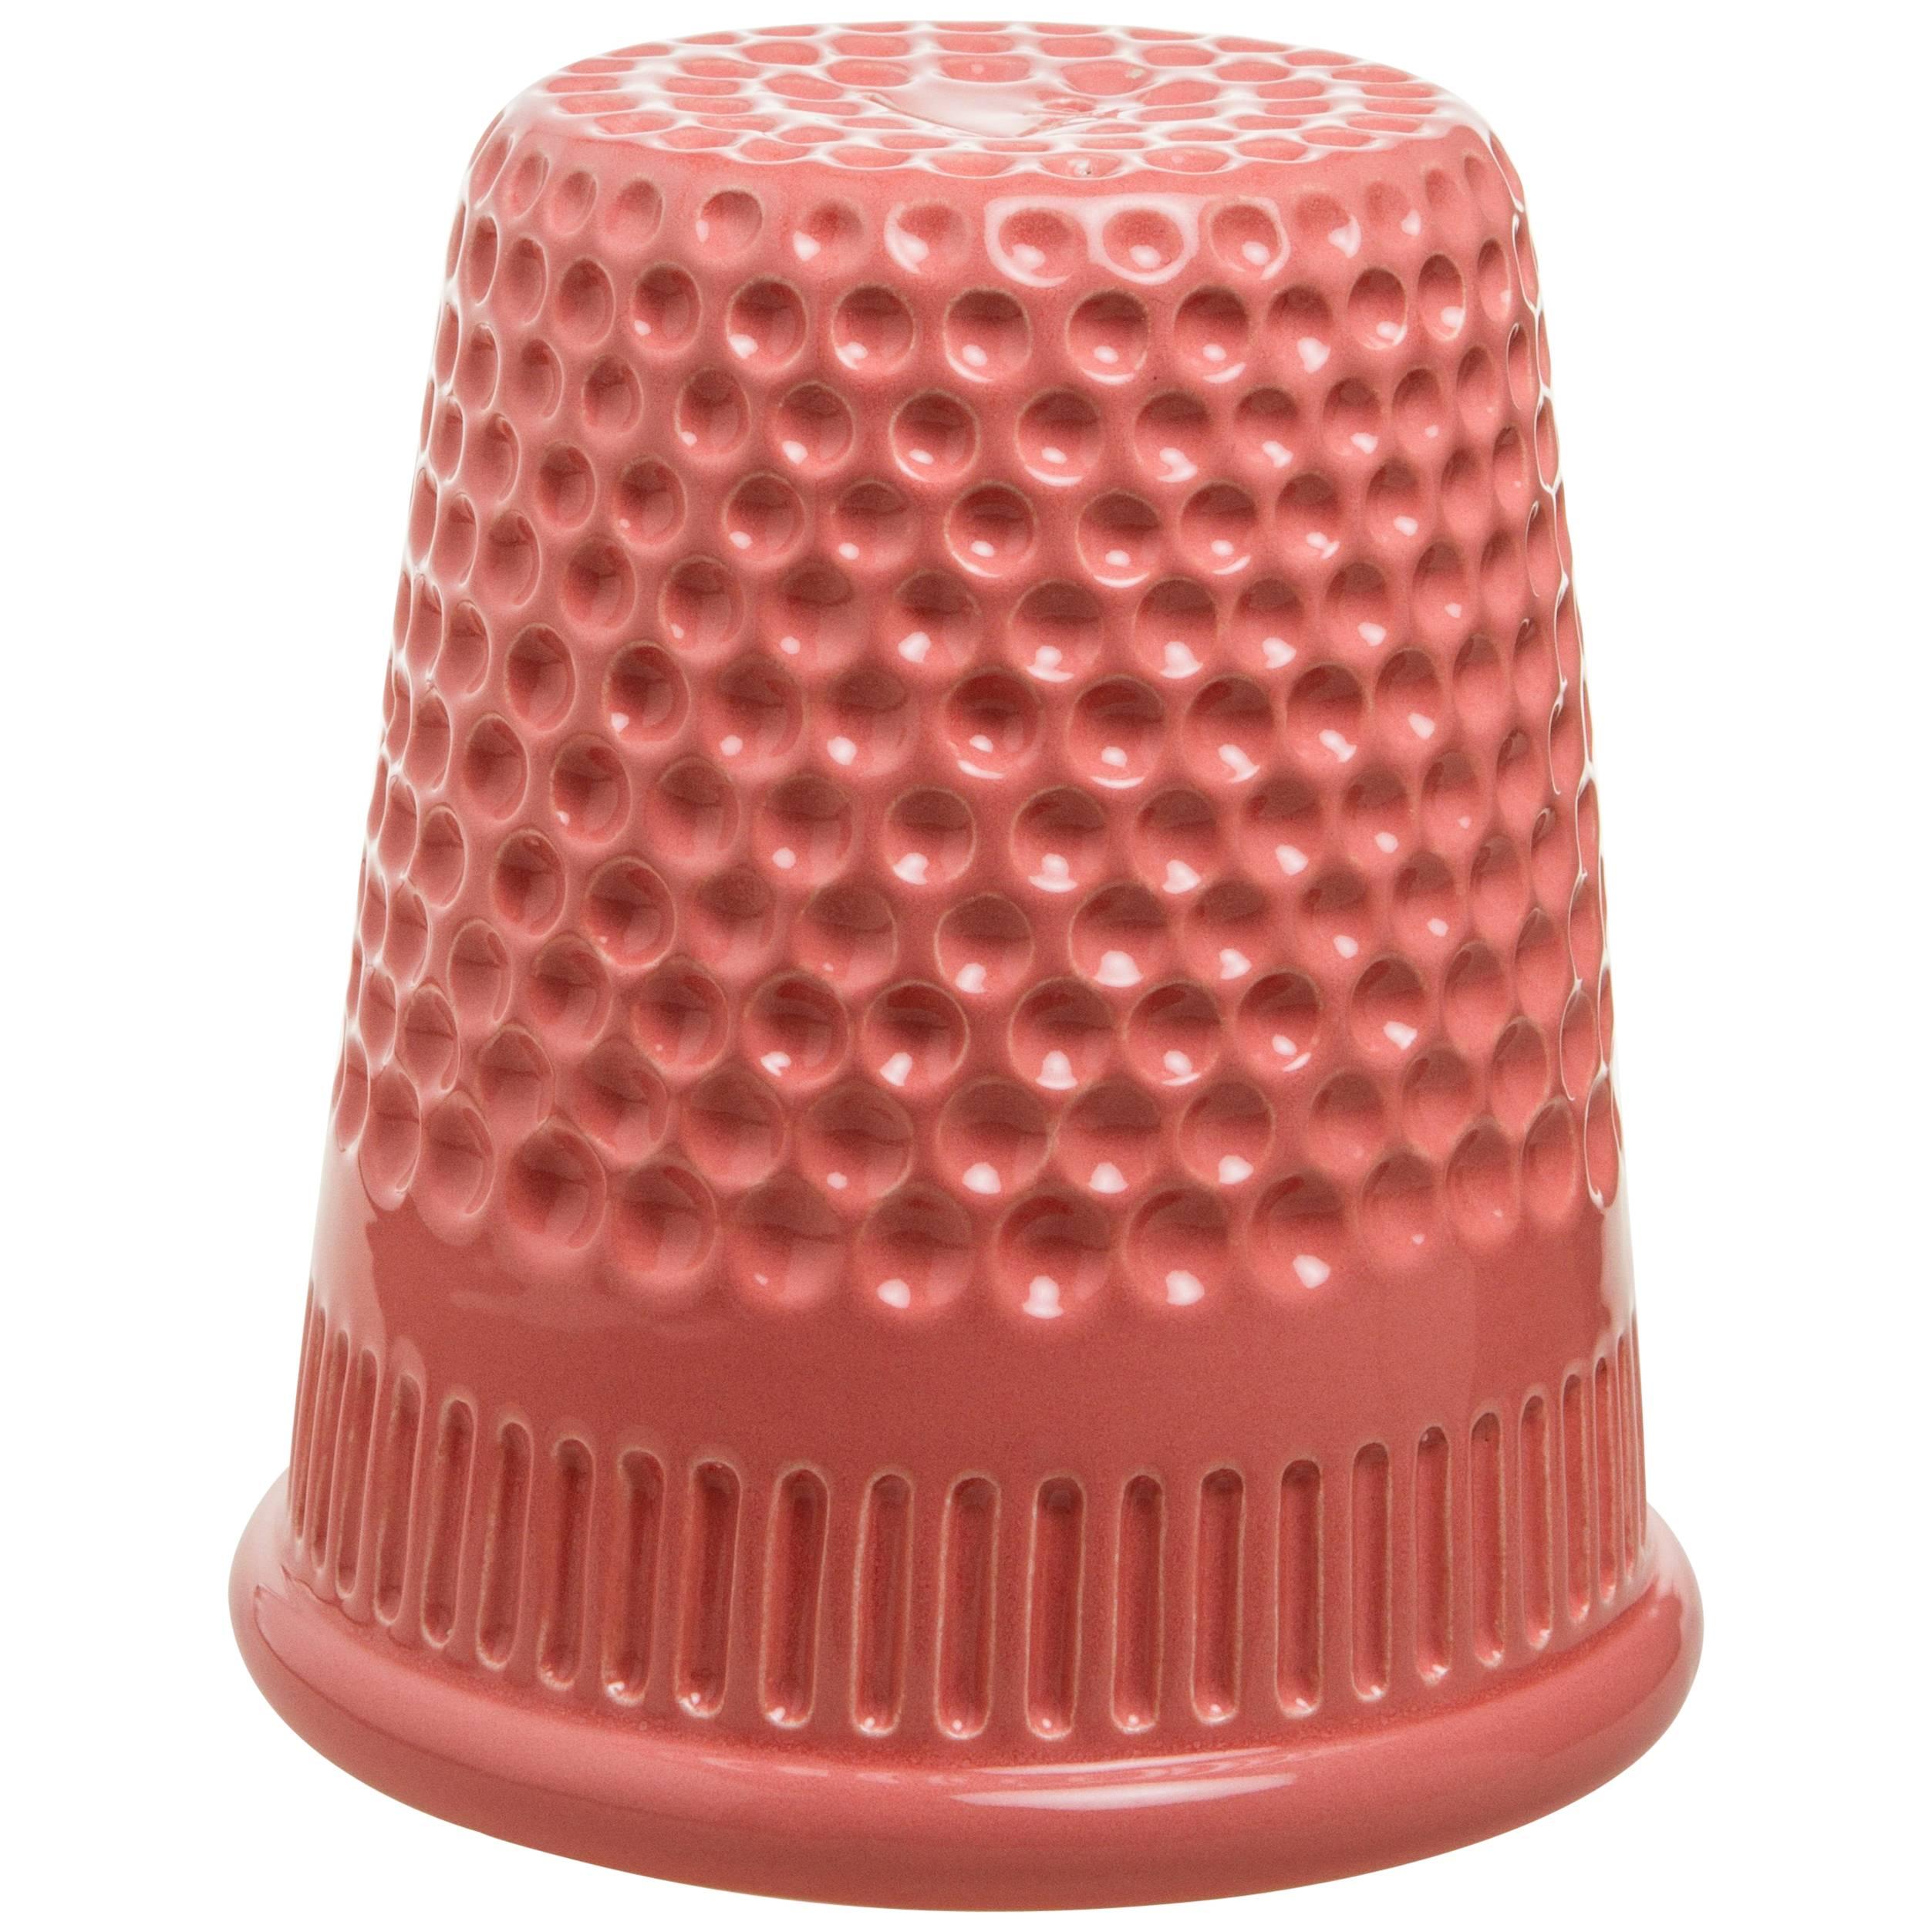 InDito Pink Vase by Vito Nesta, Made in Italy For Sale